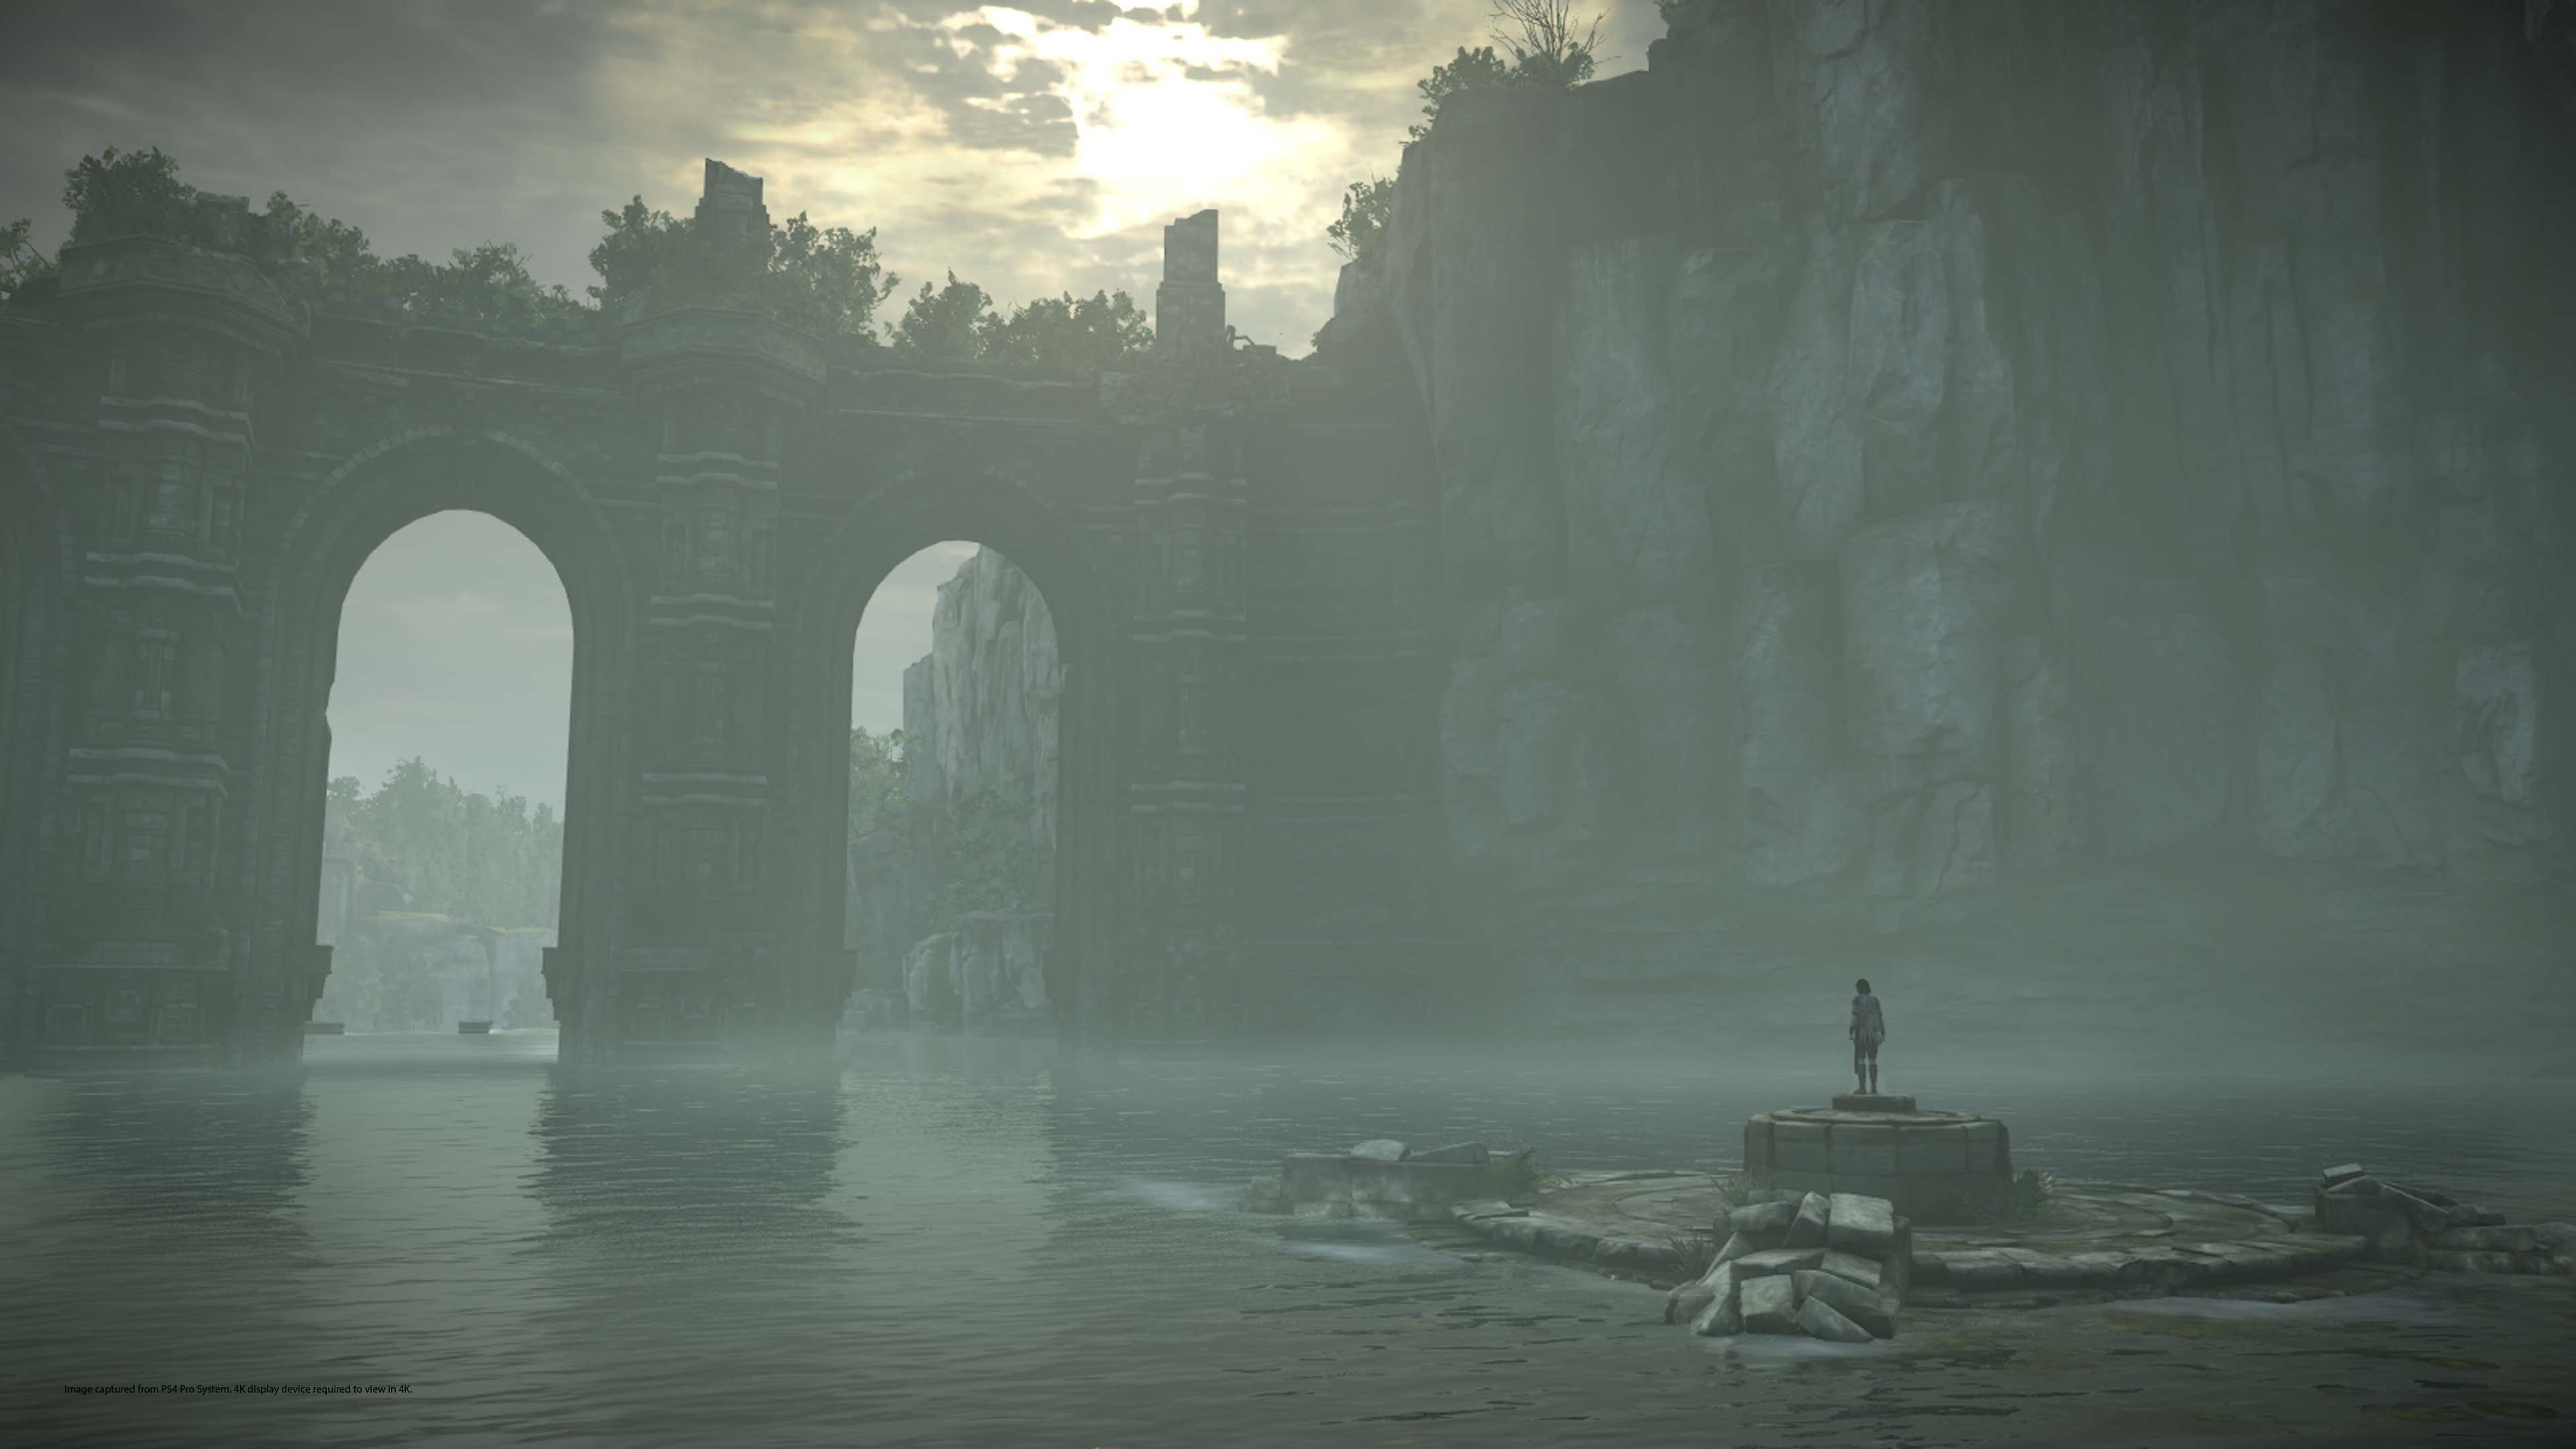  Shadow of the Colossus - PlayStation 4 : Sony